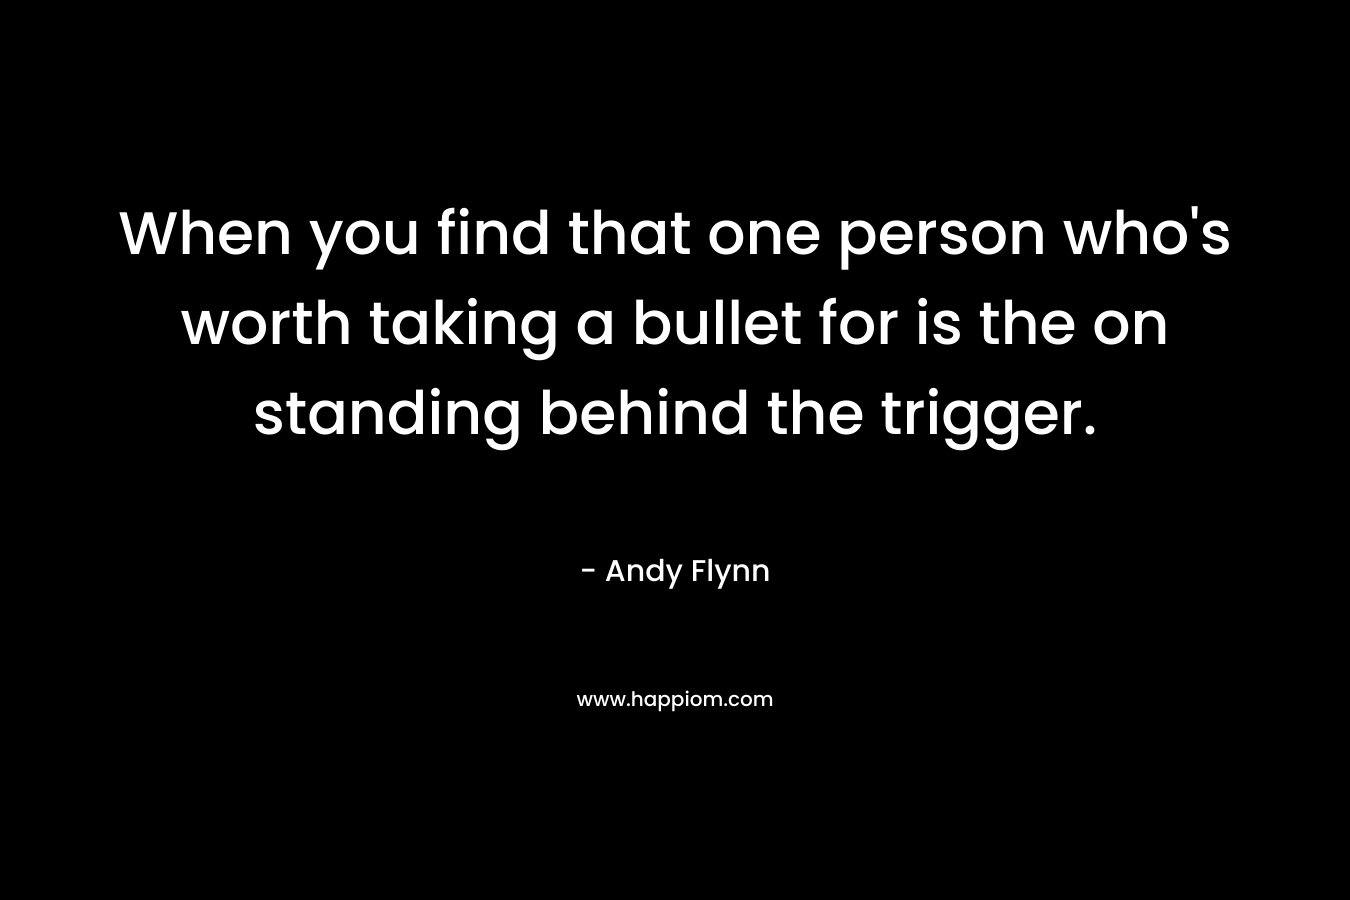 When you find that one person who’s worth taking a bullet for is the on standing behind the trigger. – Andy Flynn